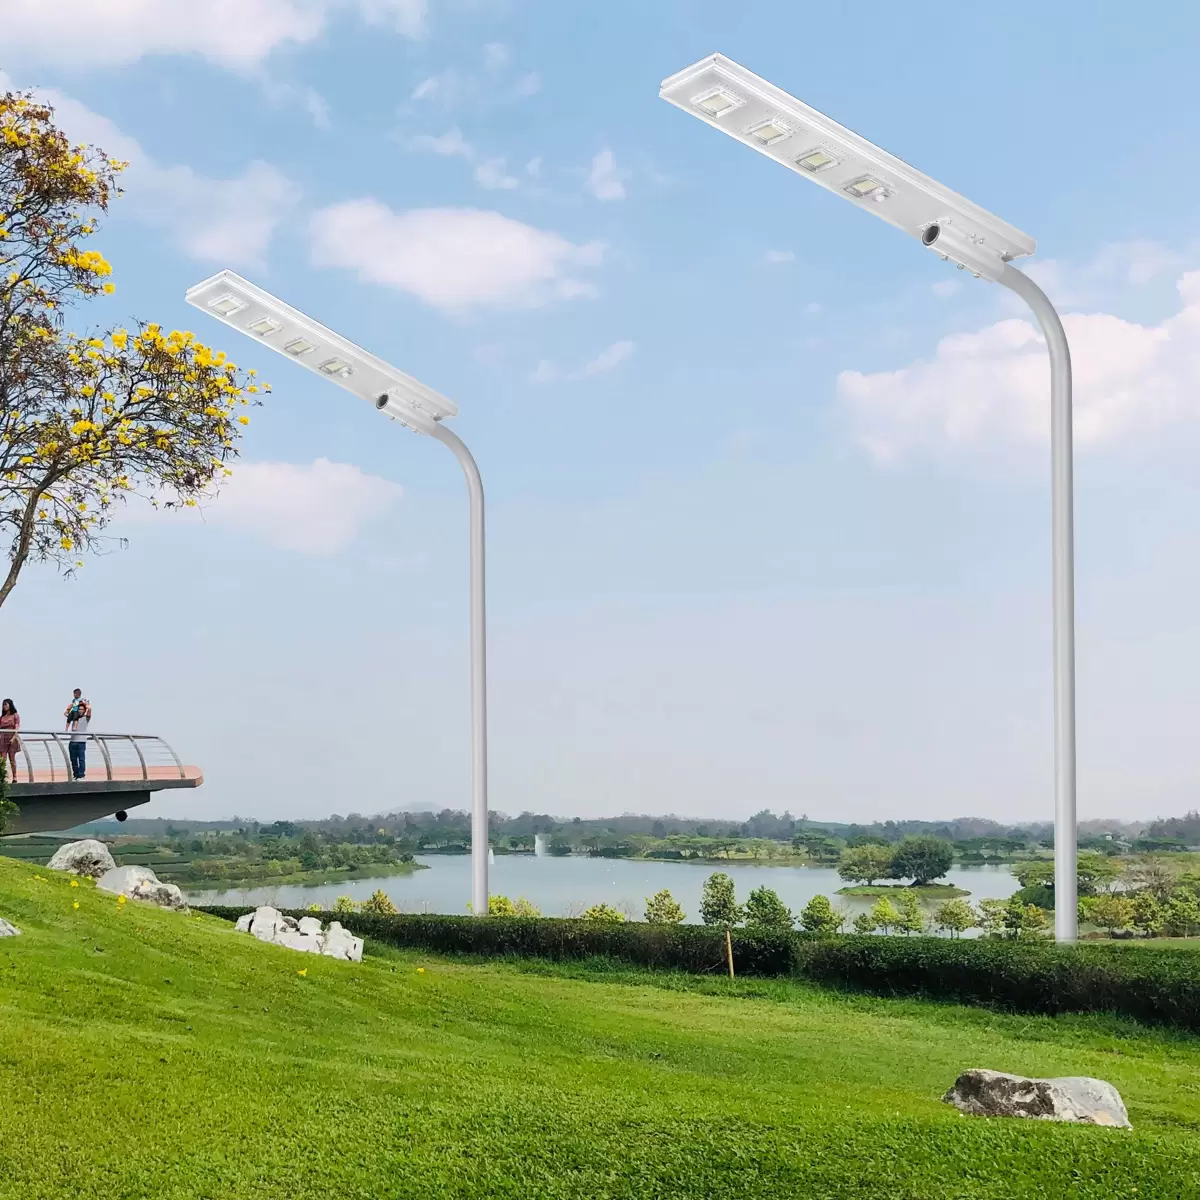 What Are The Benefits Of Bringing In Outdoor Street Lights?